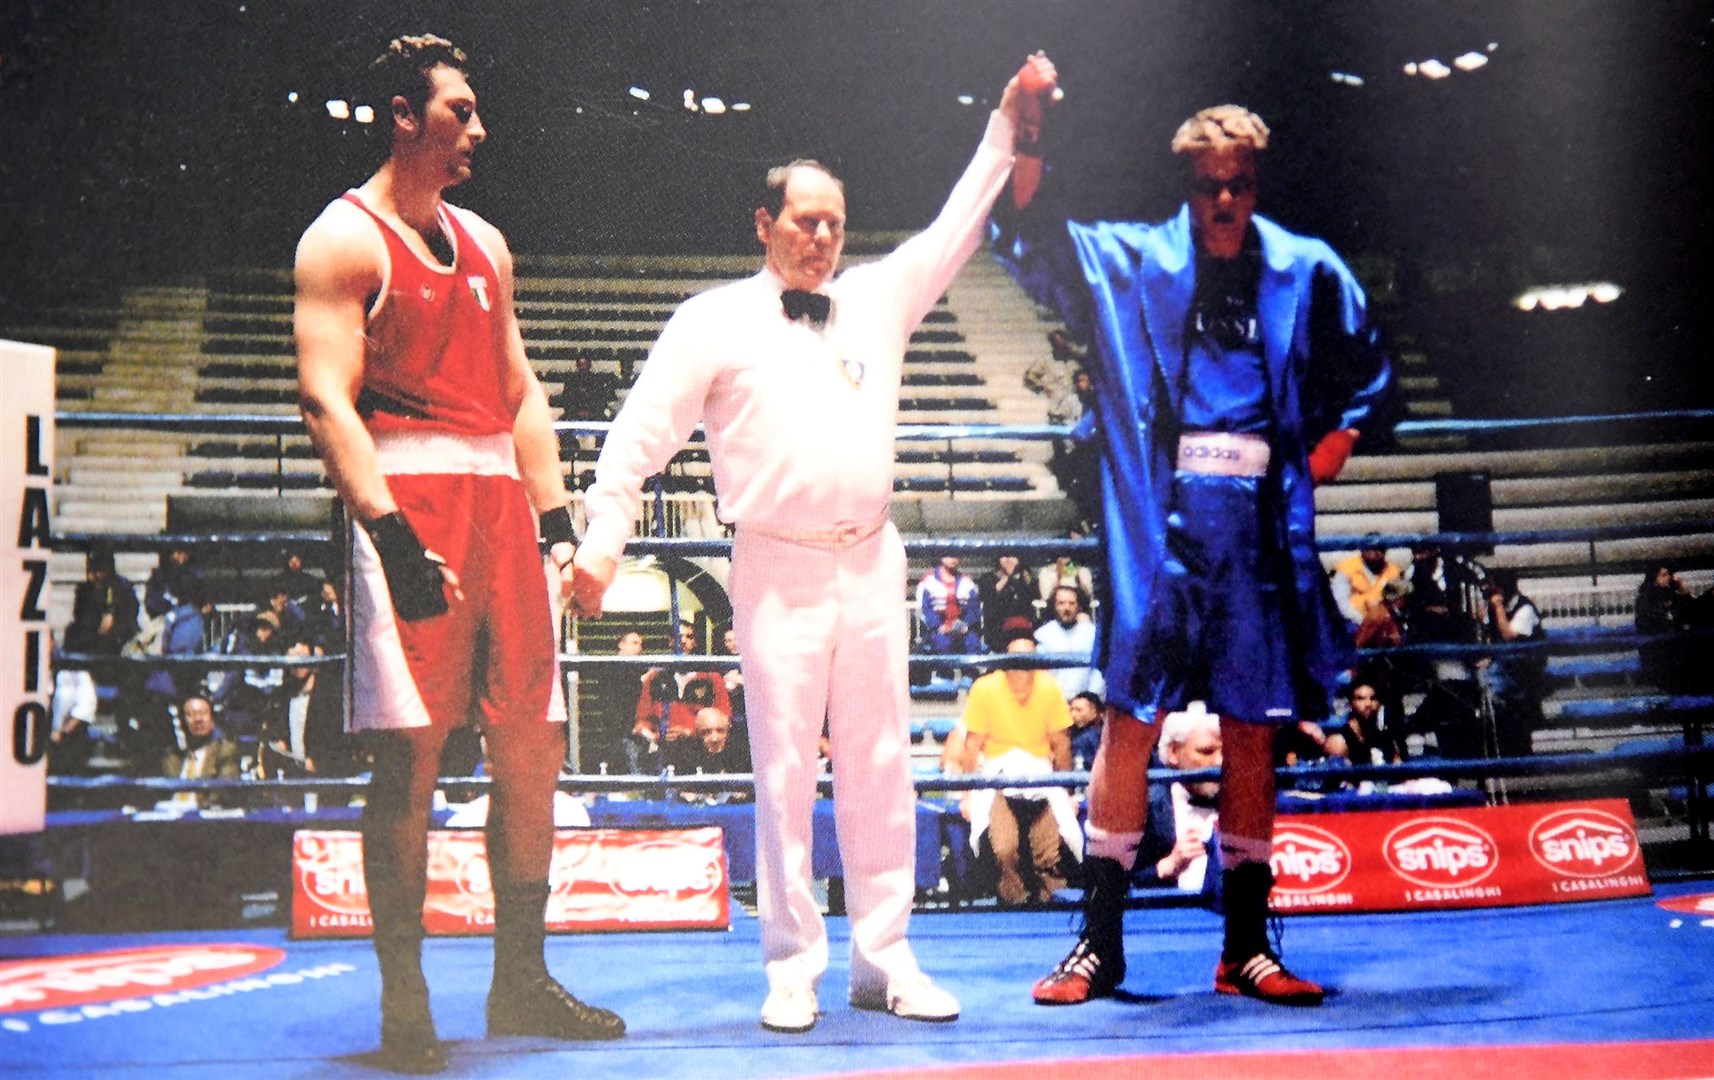 Donald Campbell was the man in the middle when Ukrainian great Wladimir Klitschko was defeated in an amateur world championship fight in 1997.